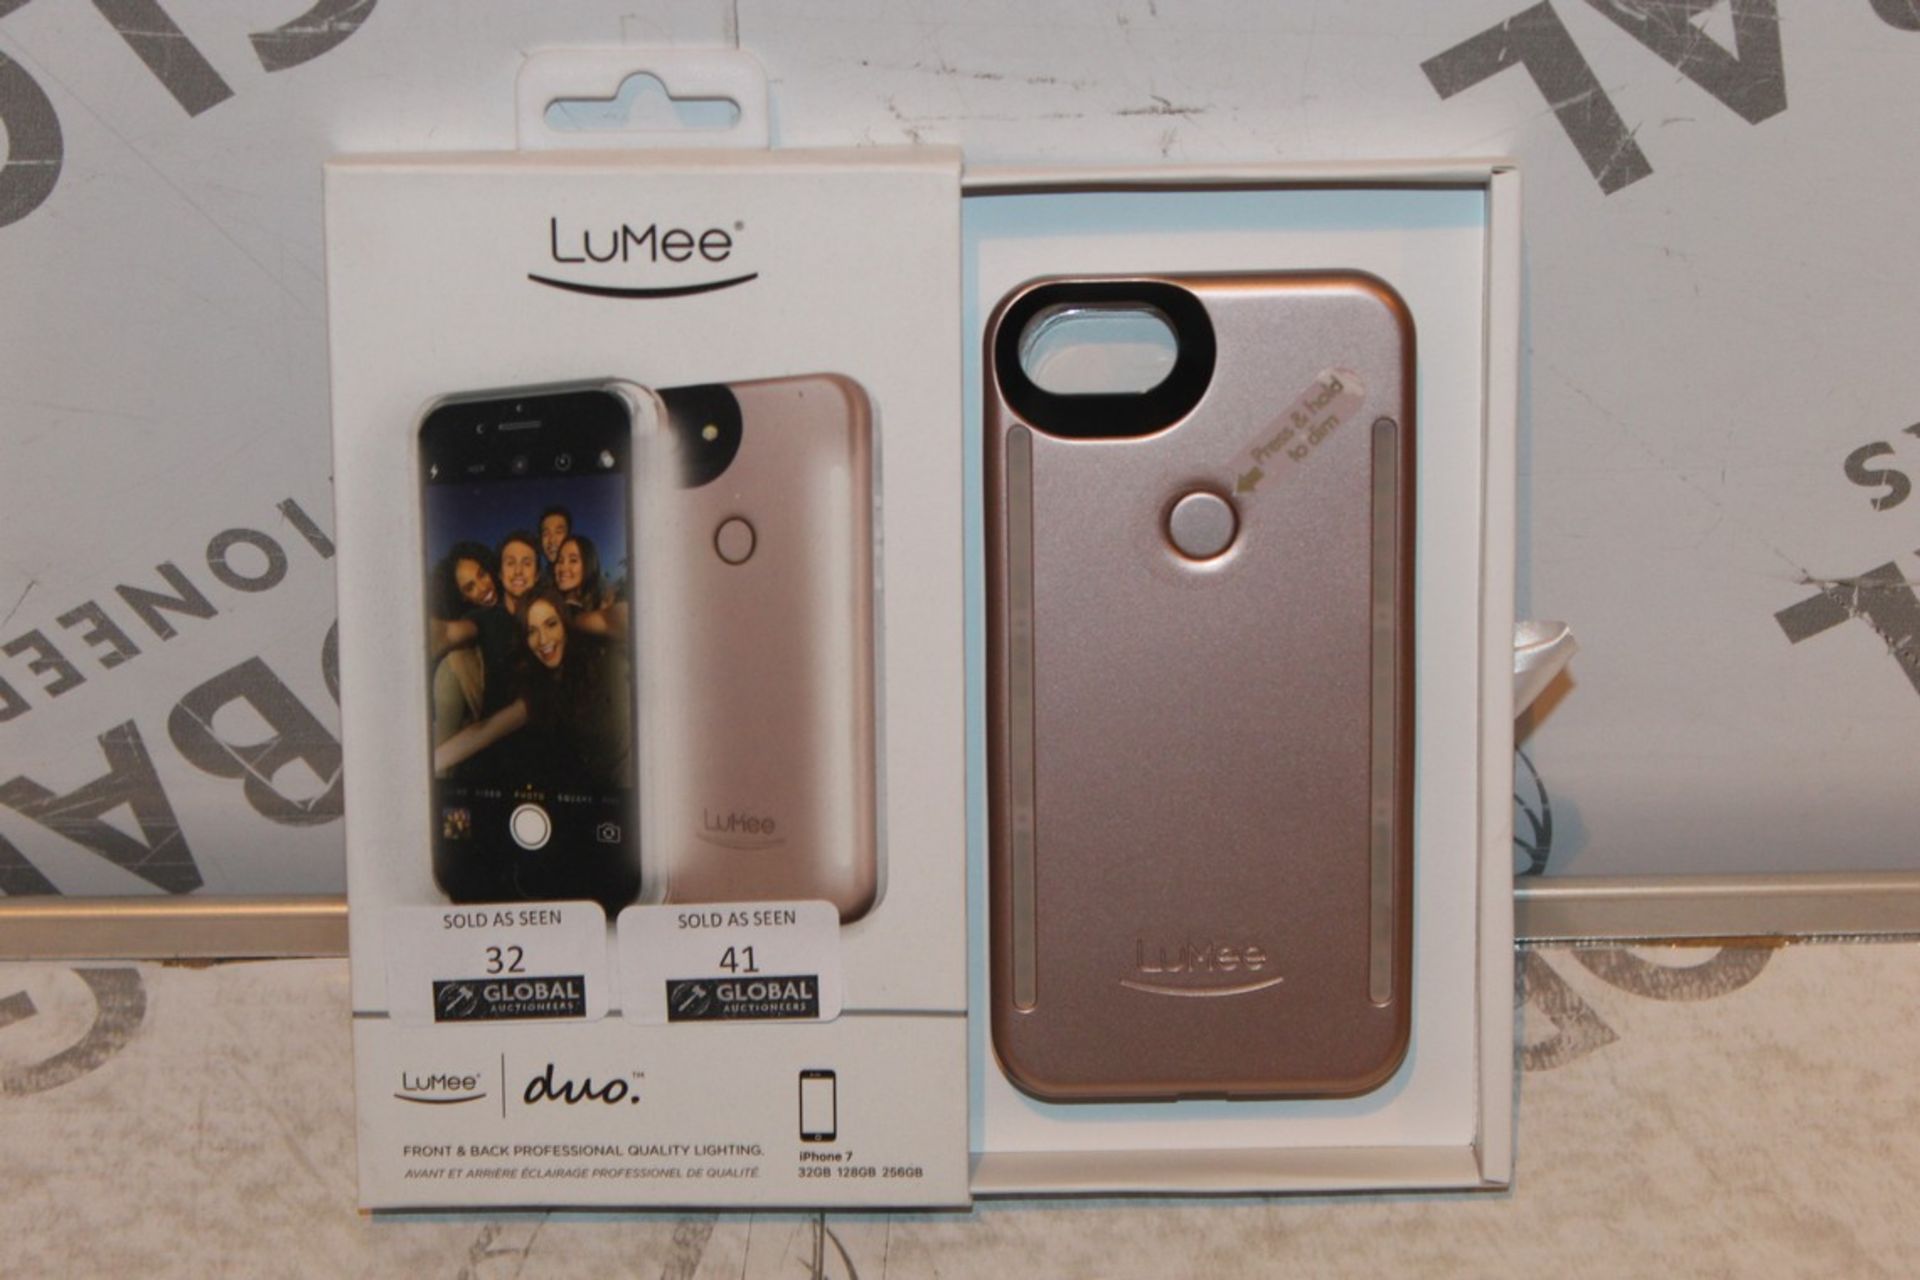 Lot to Contain 5 Lumee Duo Iphone 7 Illuminating Phone Cases RRP Combined £205